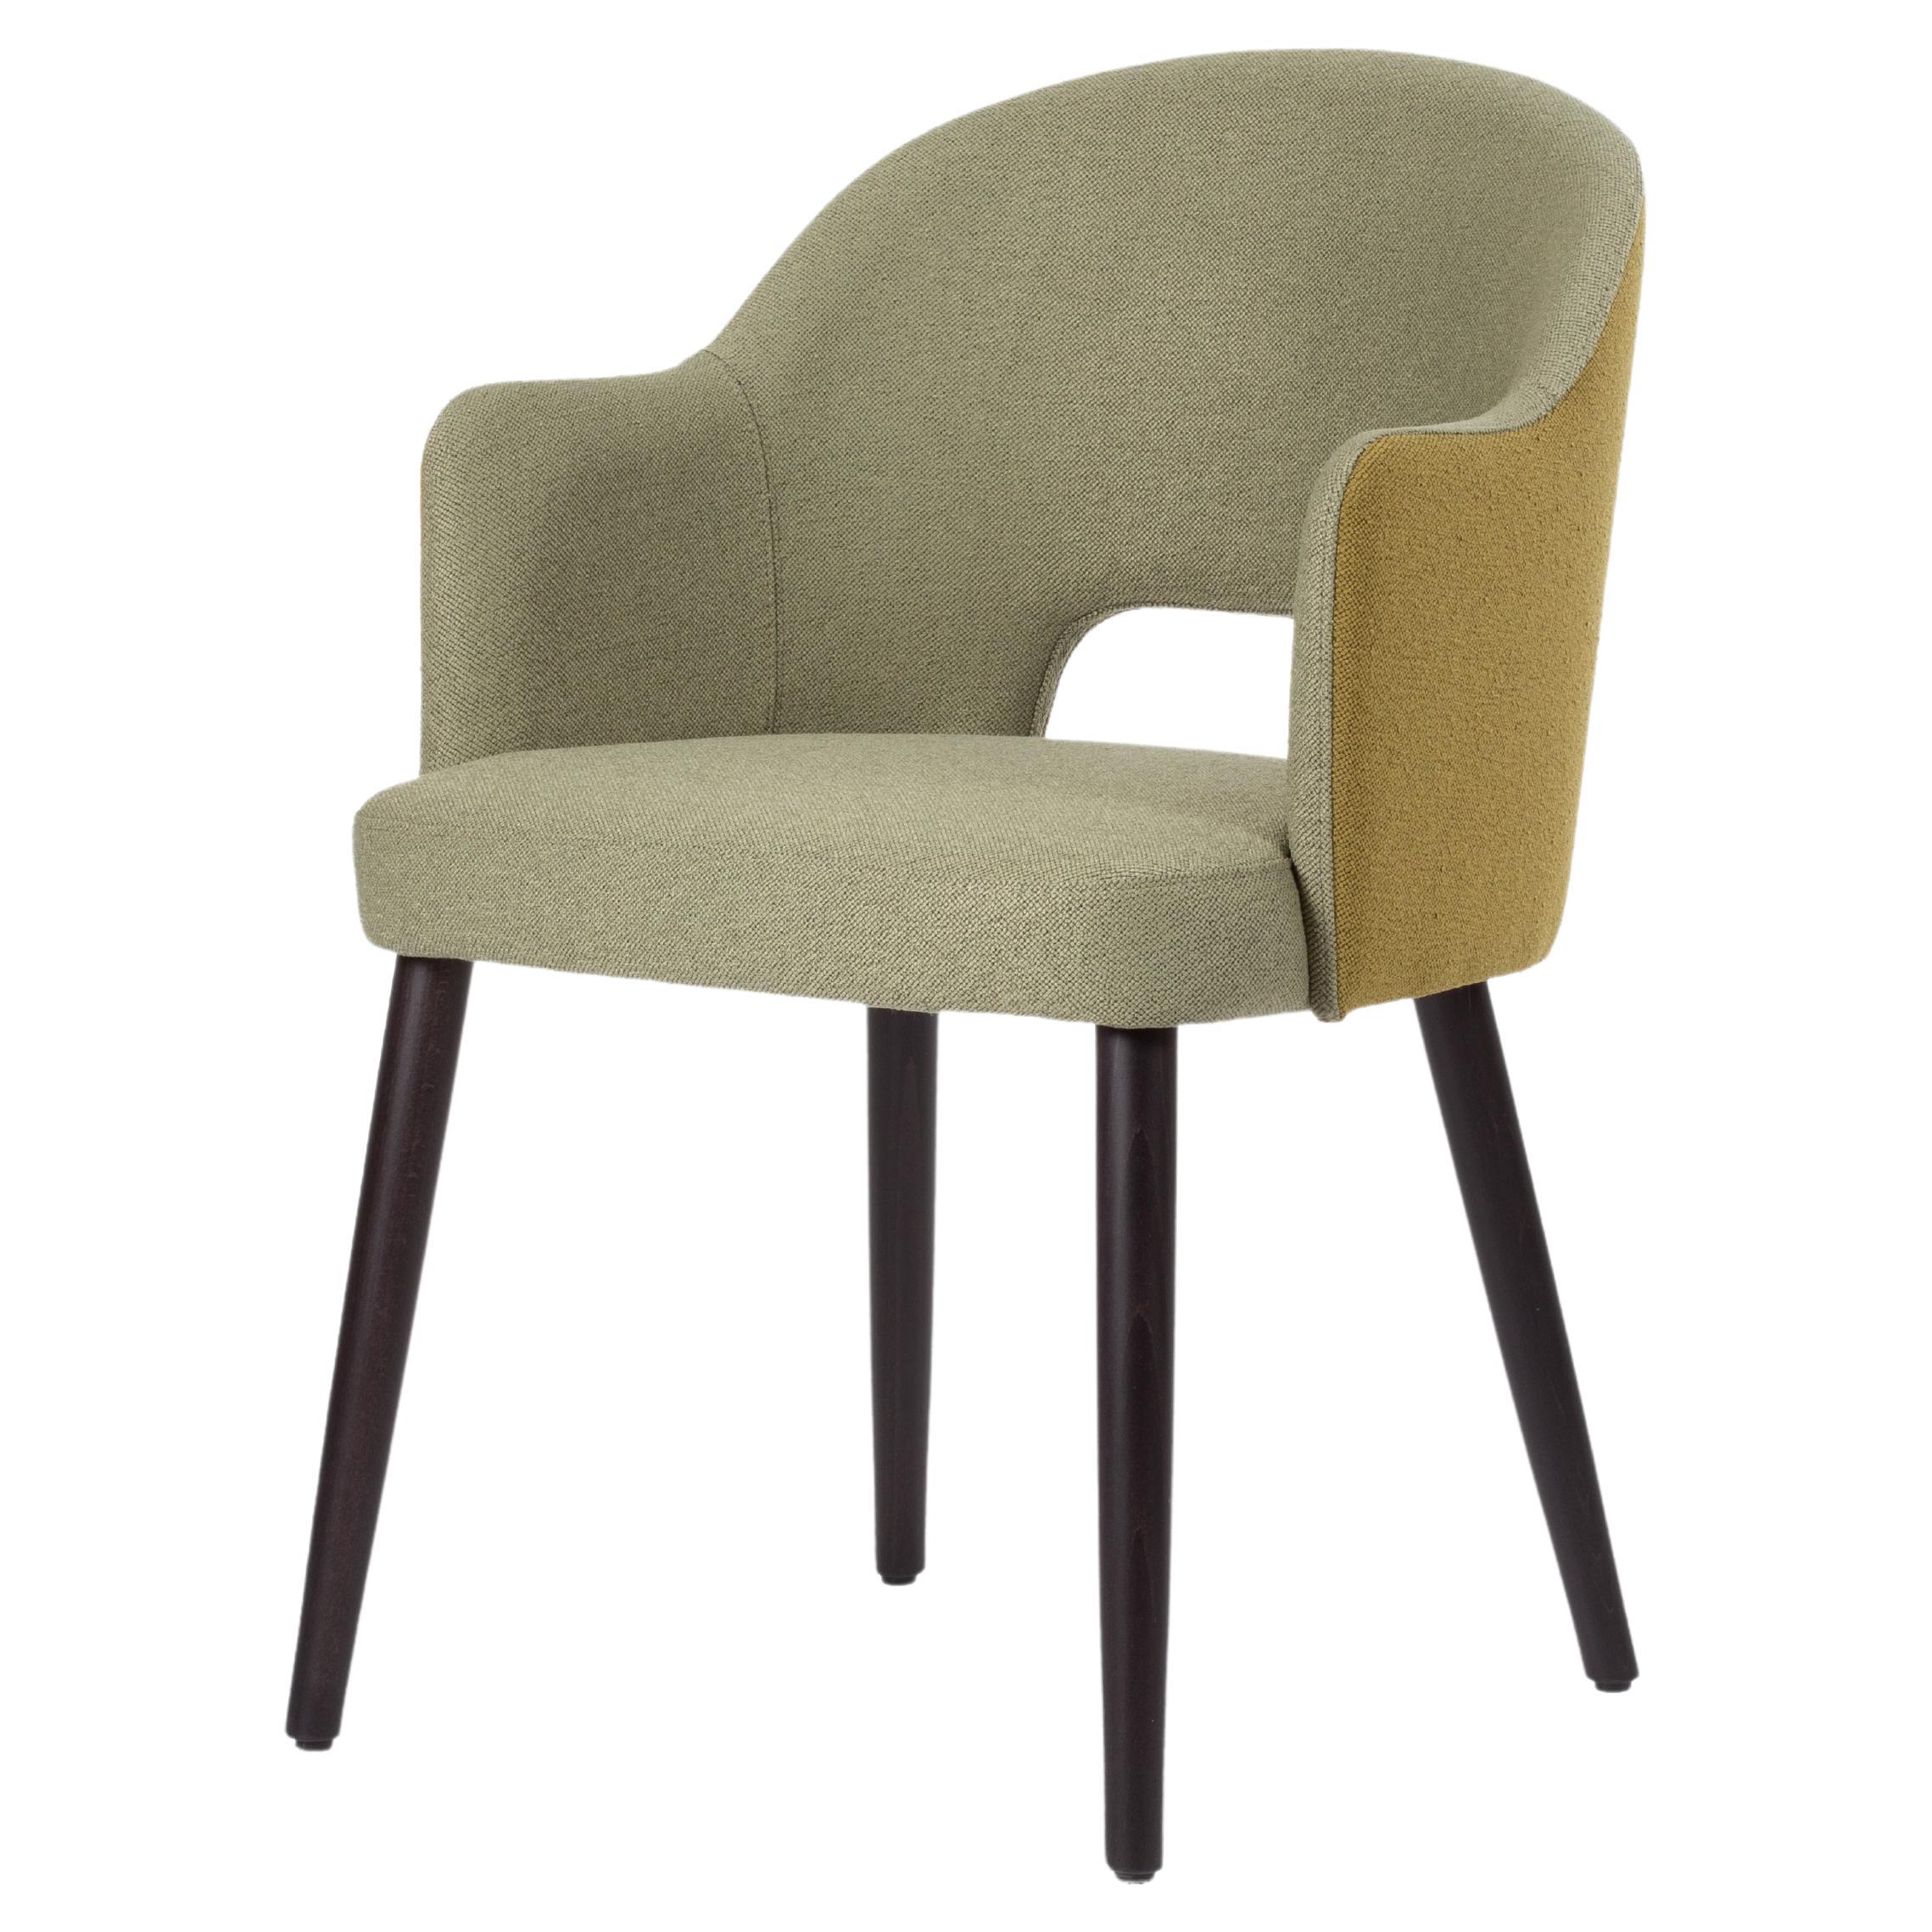 21st Century Ary Chair, Free Life Fabric and Wood, Made in Italy by Hebanon